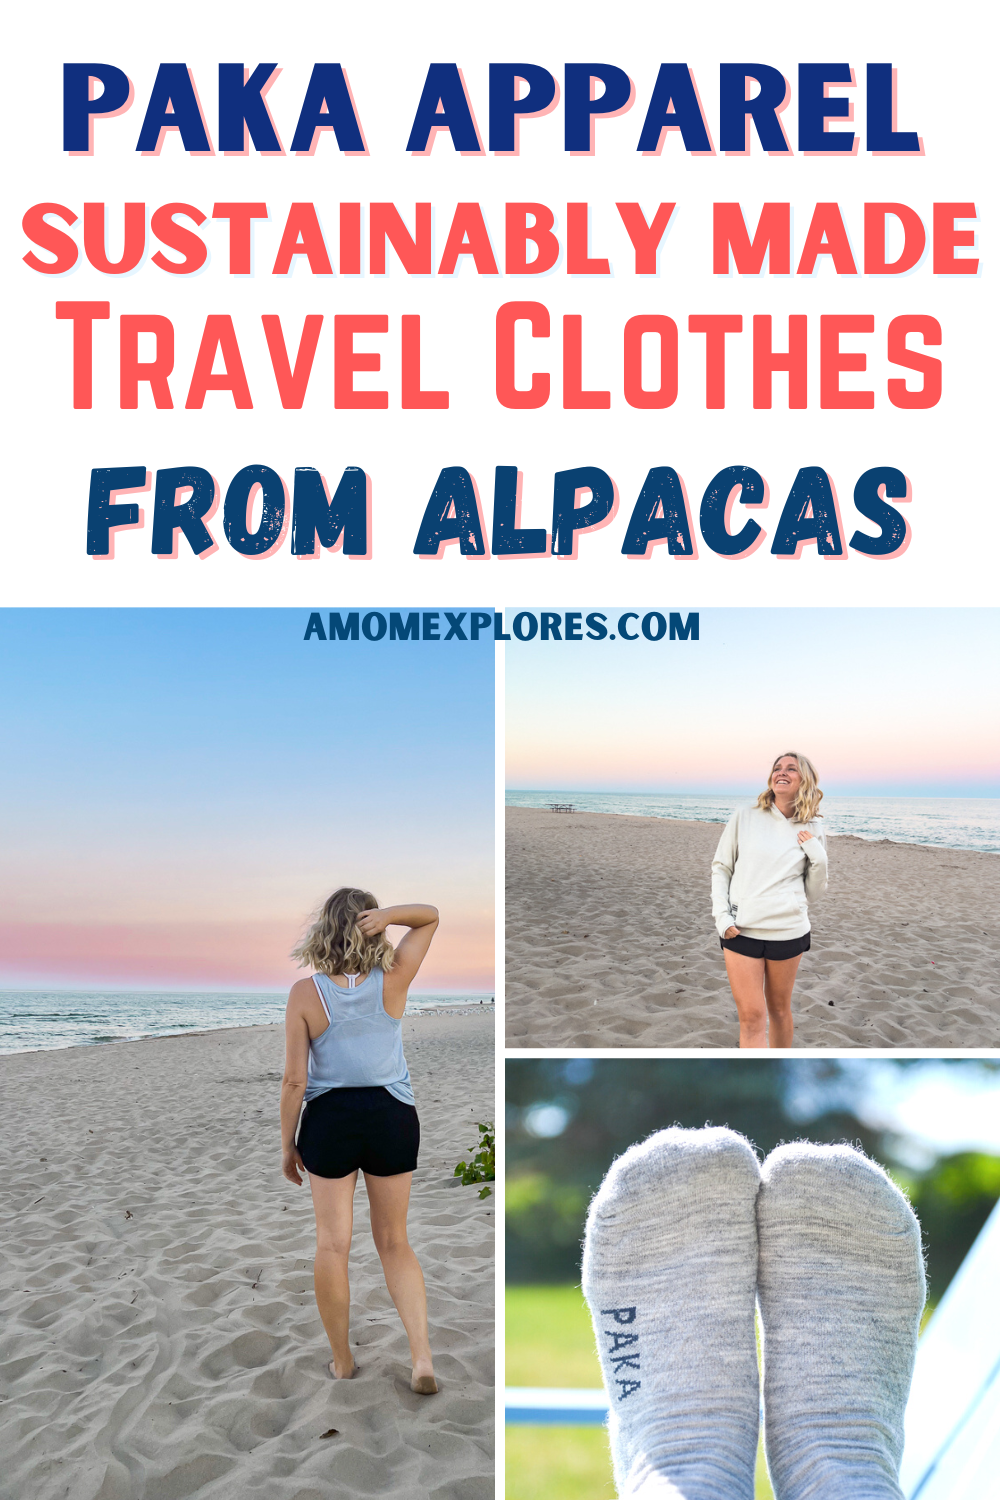 paka apparel travel clothes for women from alpaca.png